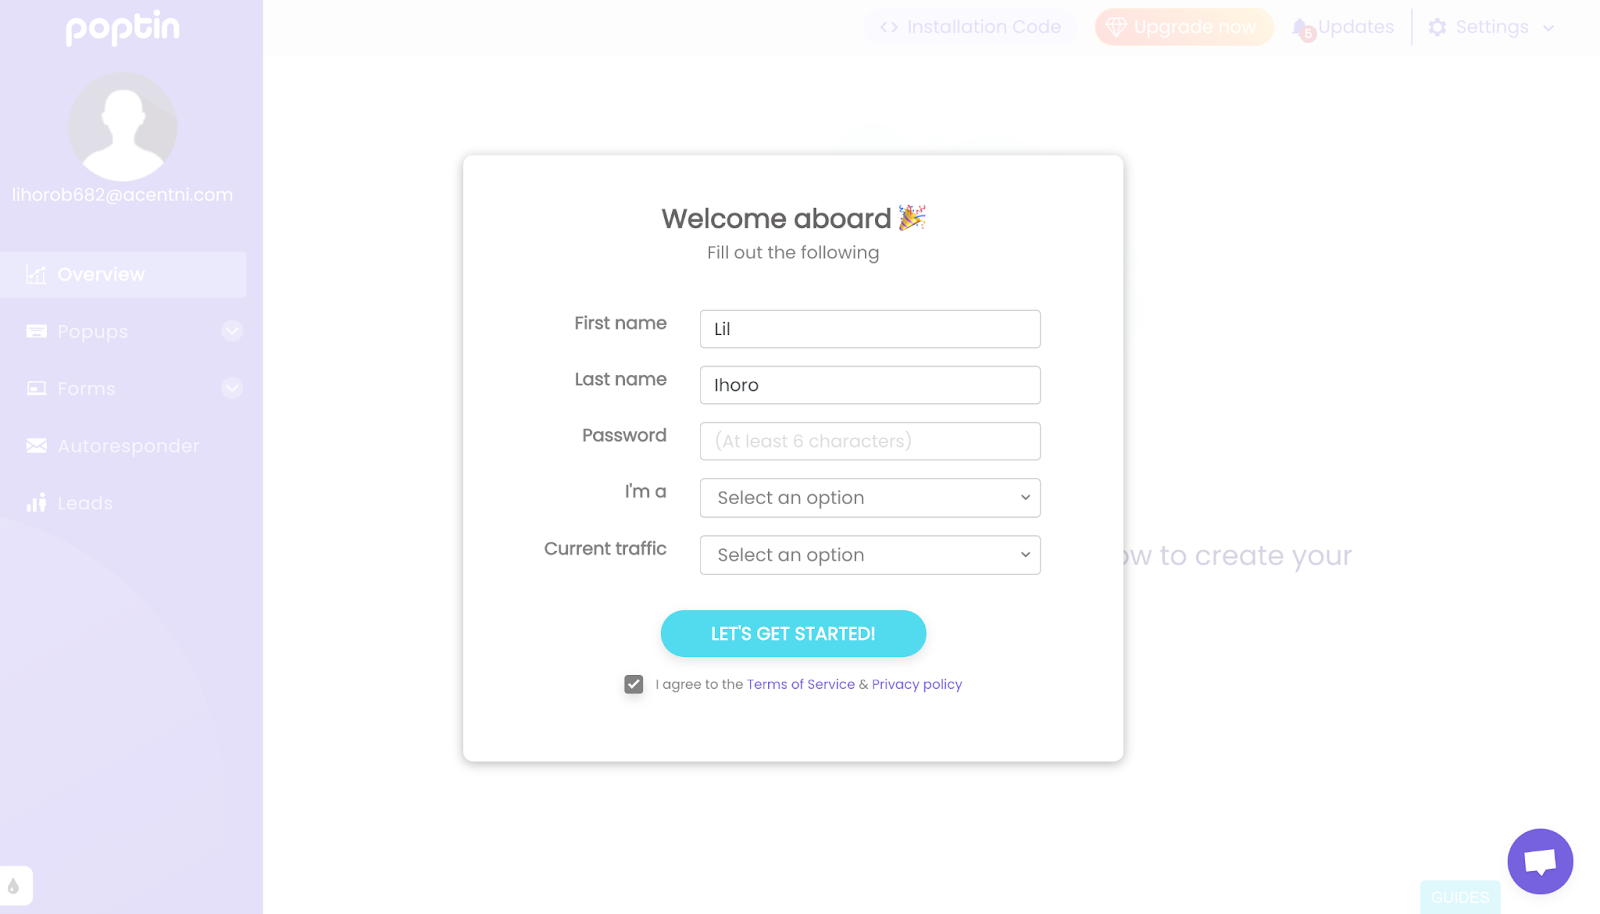 Poptin dashboard showing onboarding details for a new user